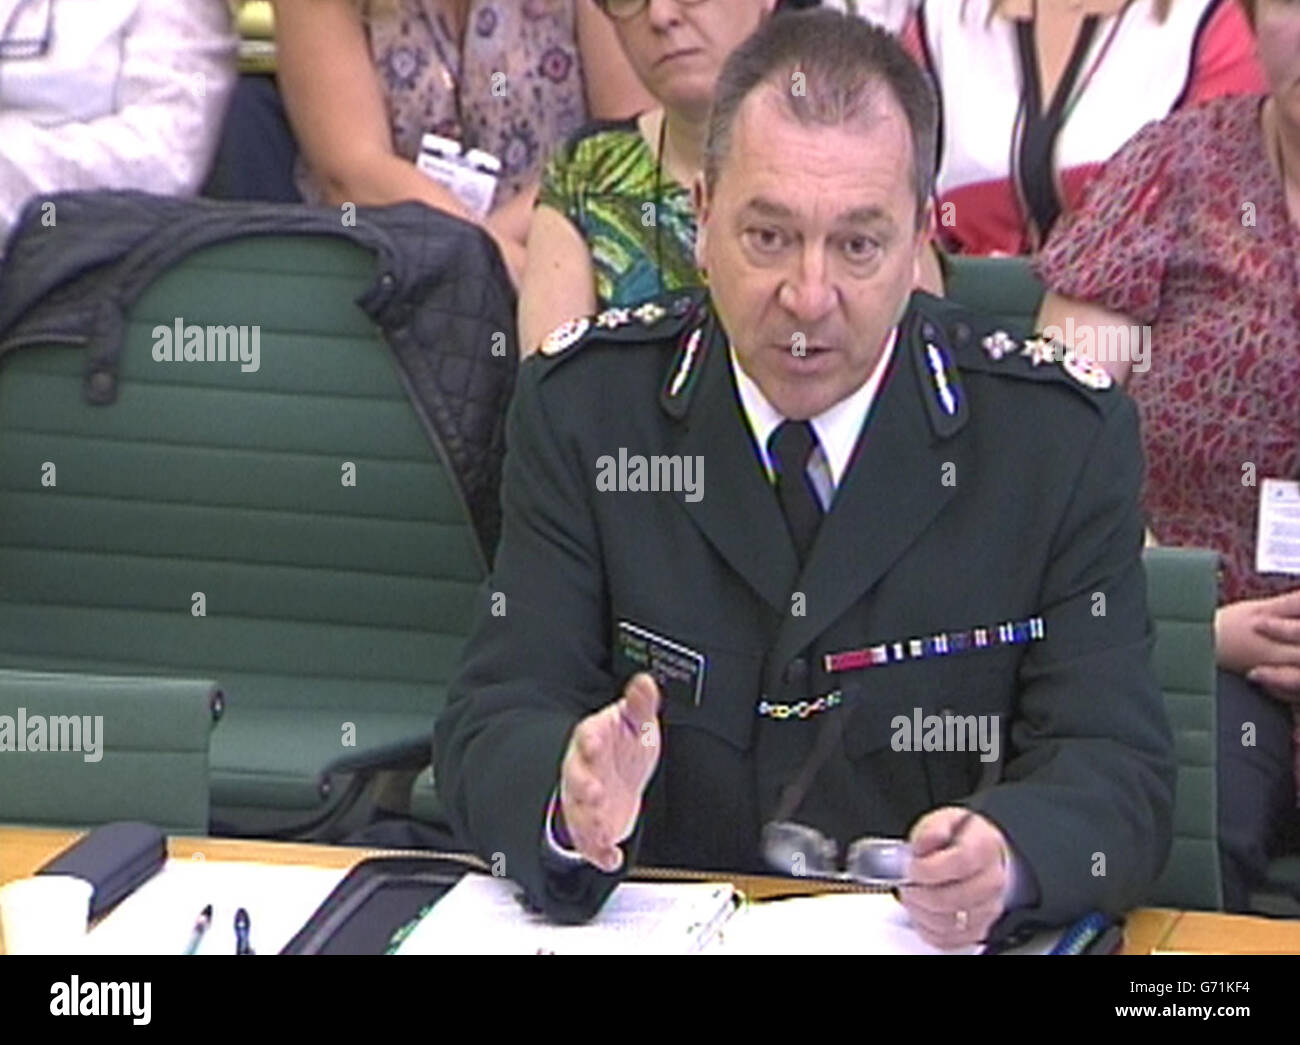 Northern Ireland's chief constable Matt Baggott gives evidence inside the House of Commons in central London, to the ongoing Northern Ireland Affairs Committee inquiry into the contentious on-the-run (OTR) administrative process, agreed between Sinn Fein and the last Labour government, which saw letters sent to about 190 republicans informing them they were not being sought by the authorities in the UK. Stock Photo